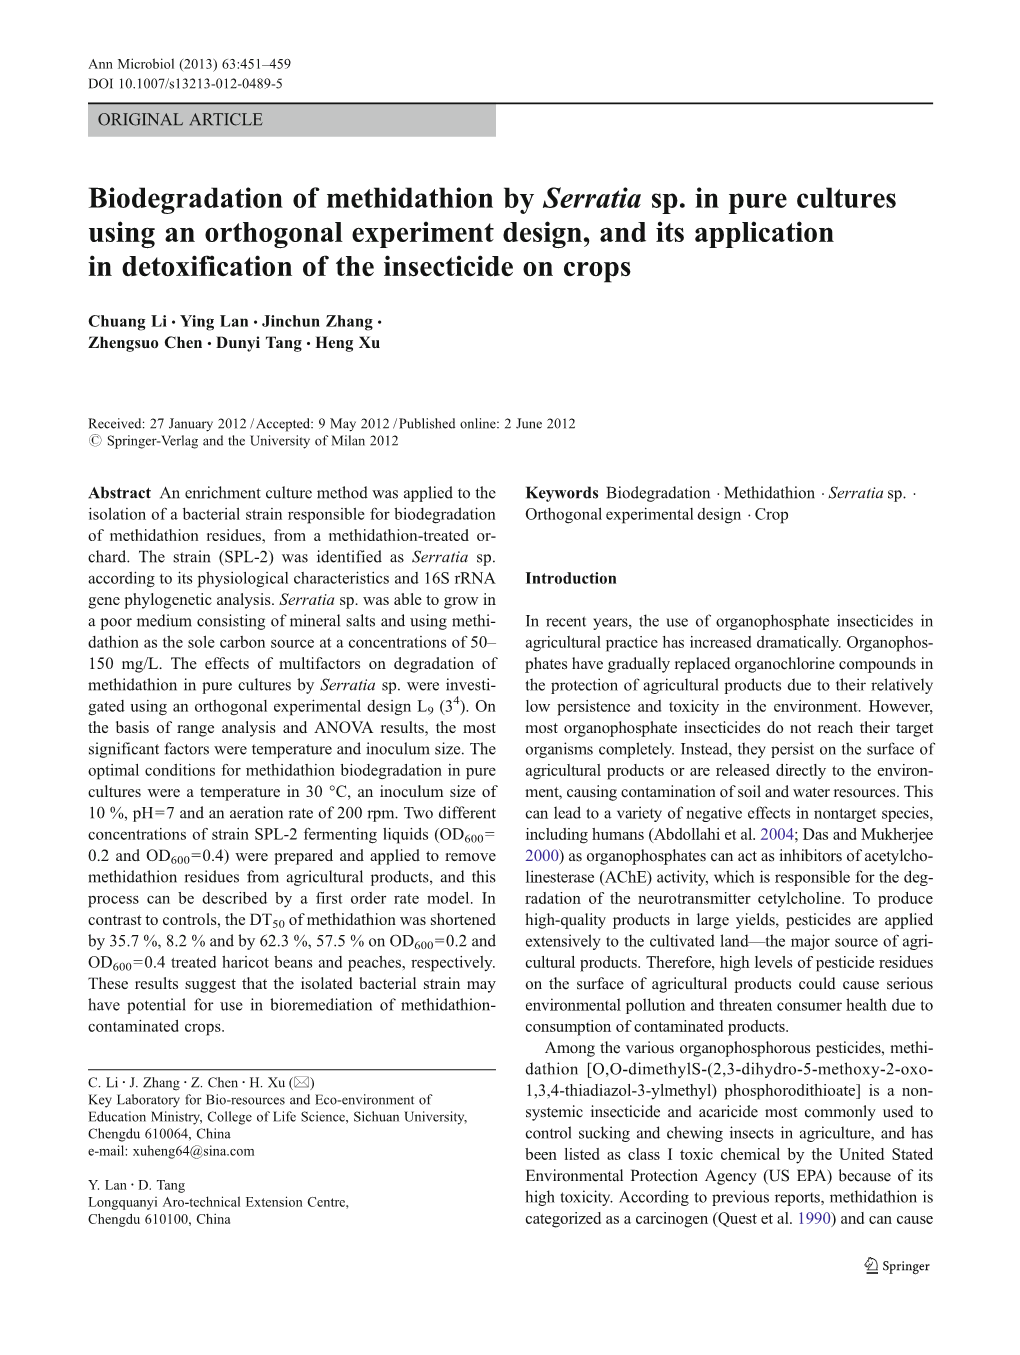 Biodegradation of Methidathion by Serratia Sp. in Pure Cultures Using